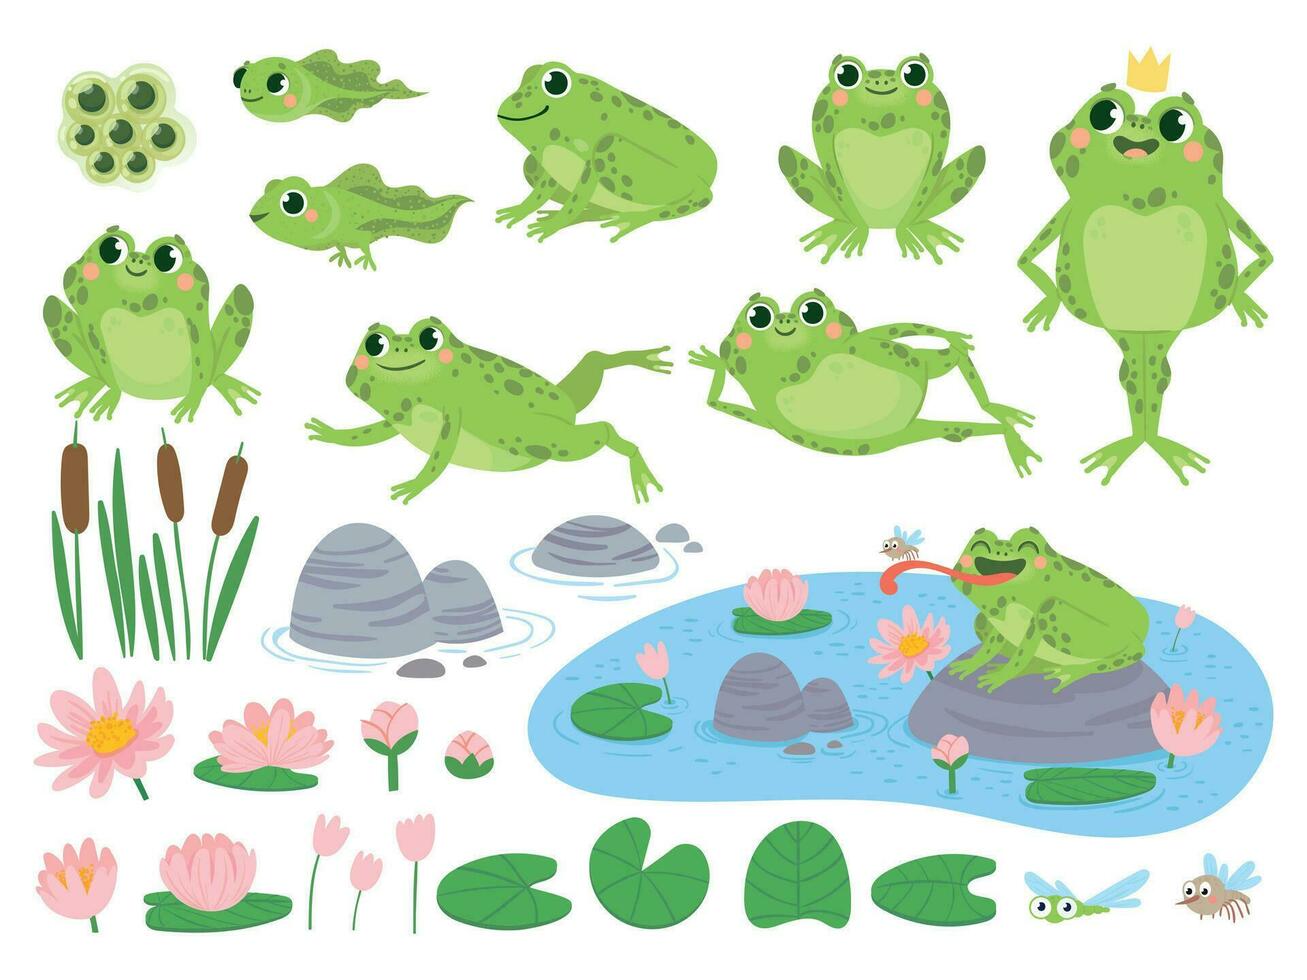 Cartoon frogs. Green cute frog, egg masses, tadpole and froglet. Aquatic plants water lily leaf, toads wild nature life vector set